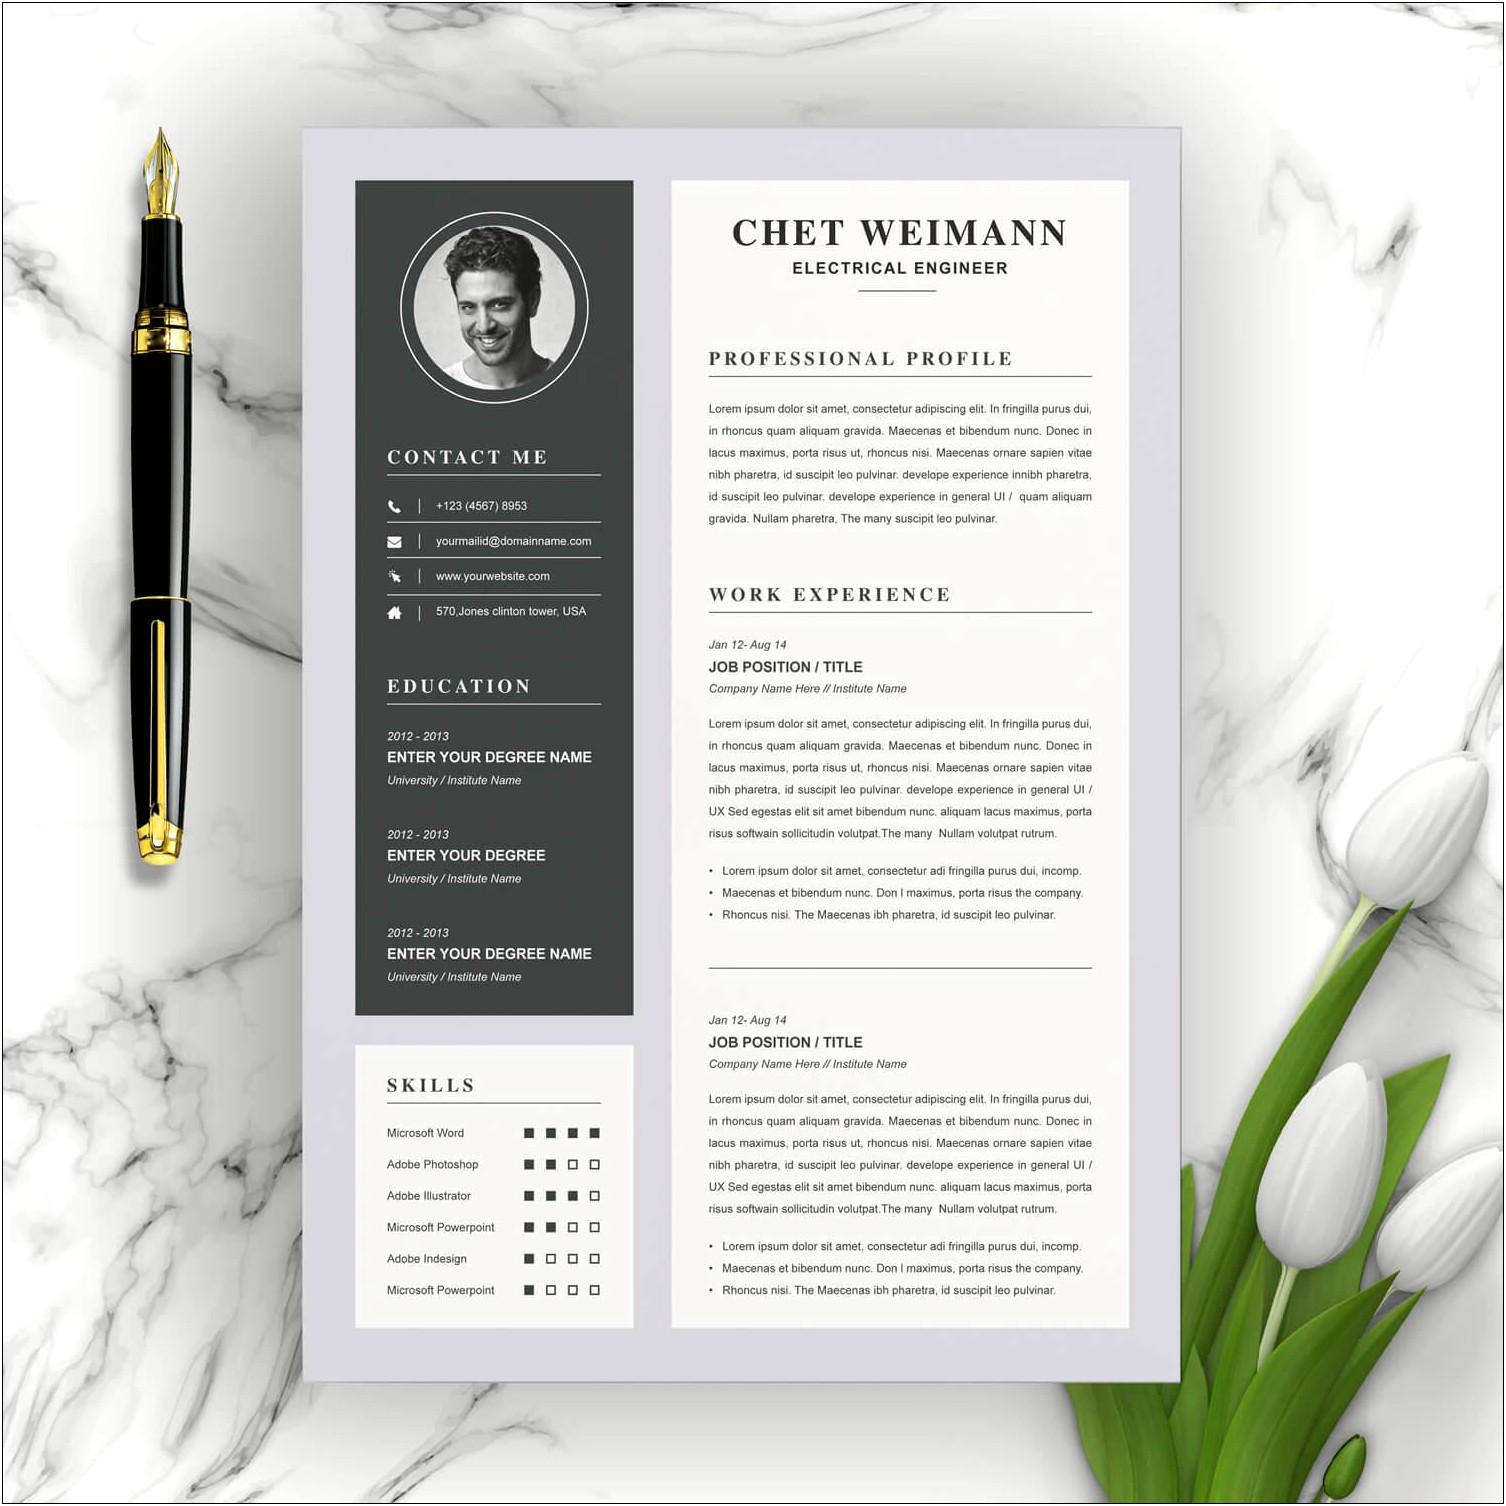 Sample Resume For Experienced Engineer Download